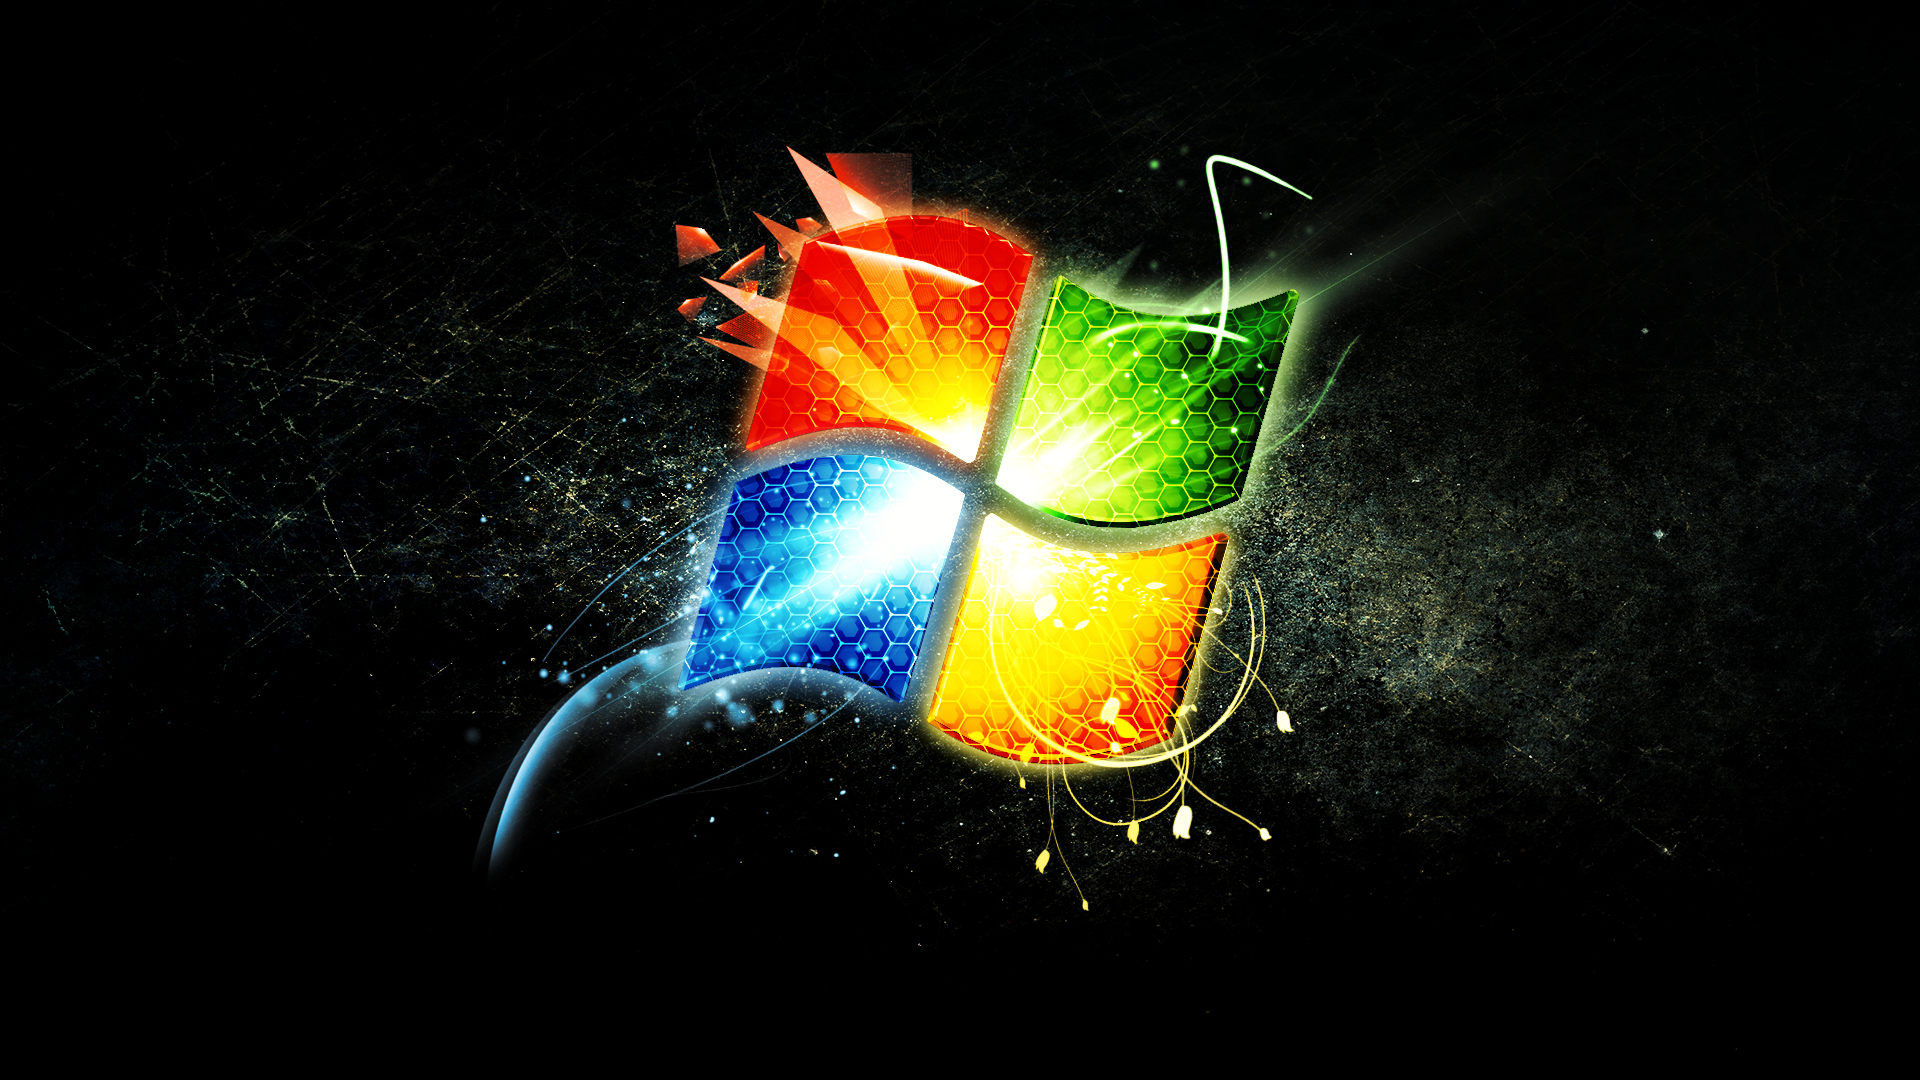 Windows 7 Animated GIF Wallpaper 56 Wallpapers HD Wallpapers